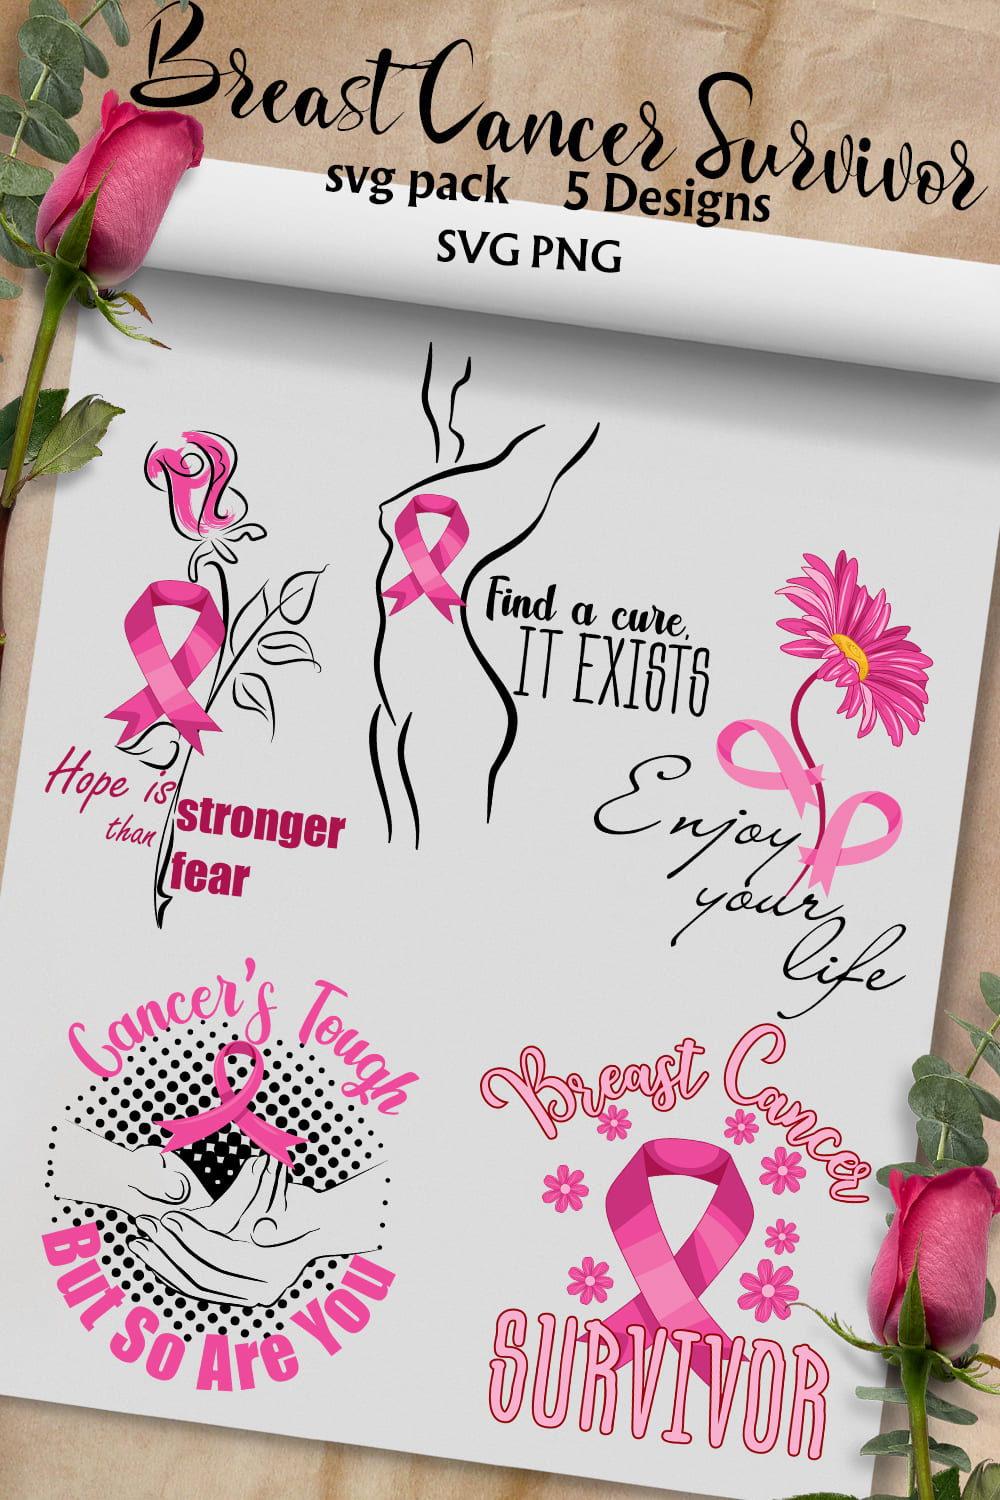 Lettering with breast cancer illustrations.